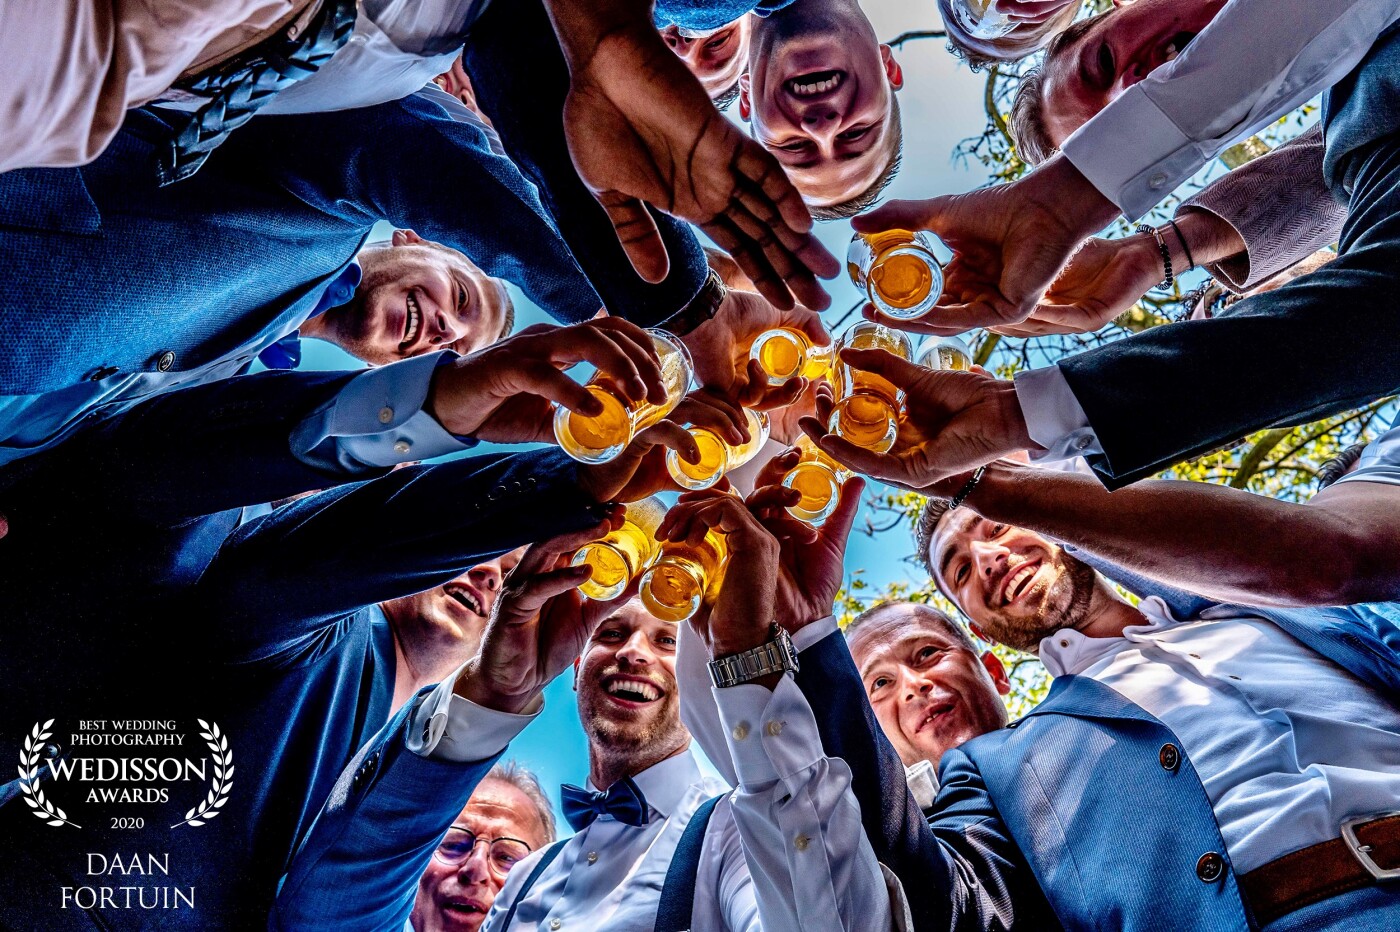 Men & beer!  The perfect combination ;)And a fun way to open a group photo session with the groom's best friends ;)...cheers!!